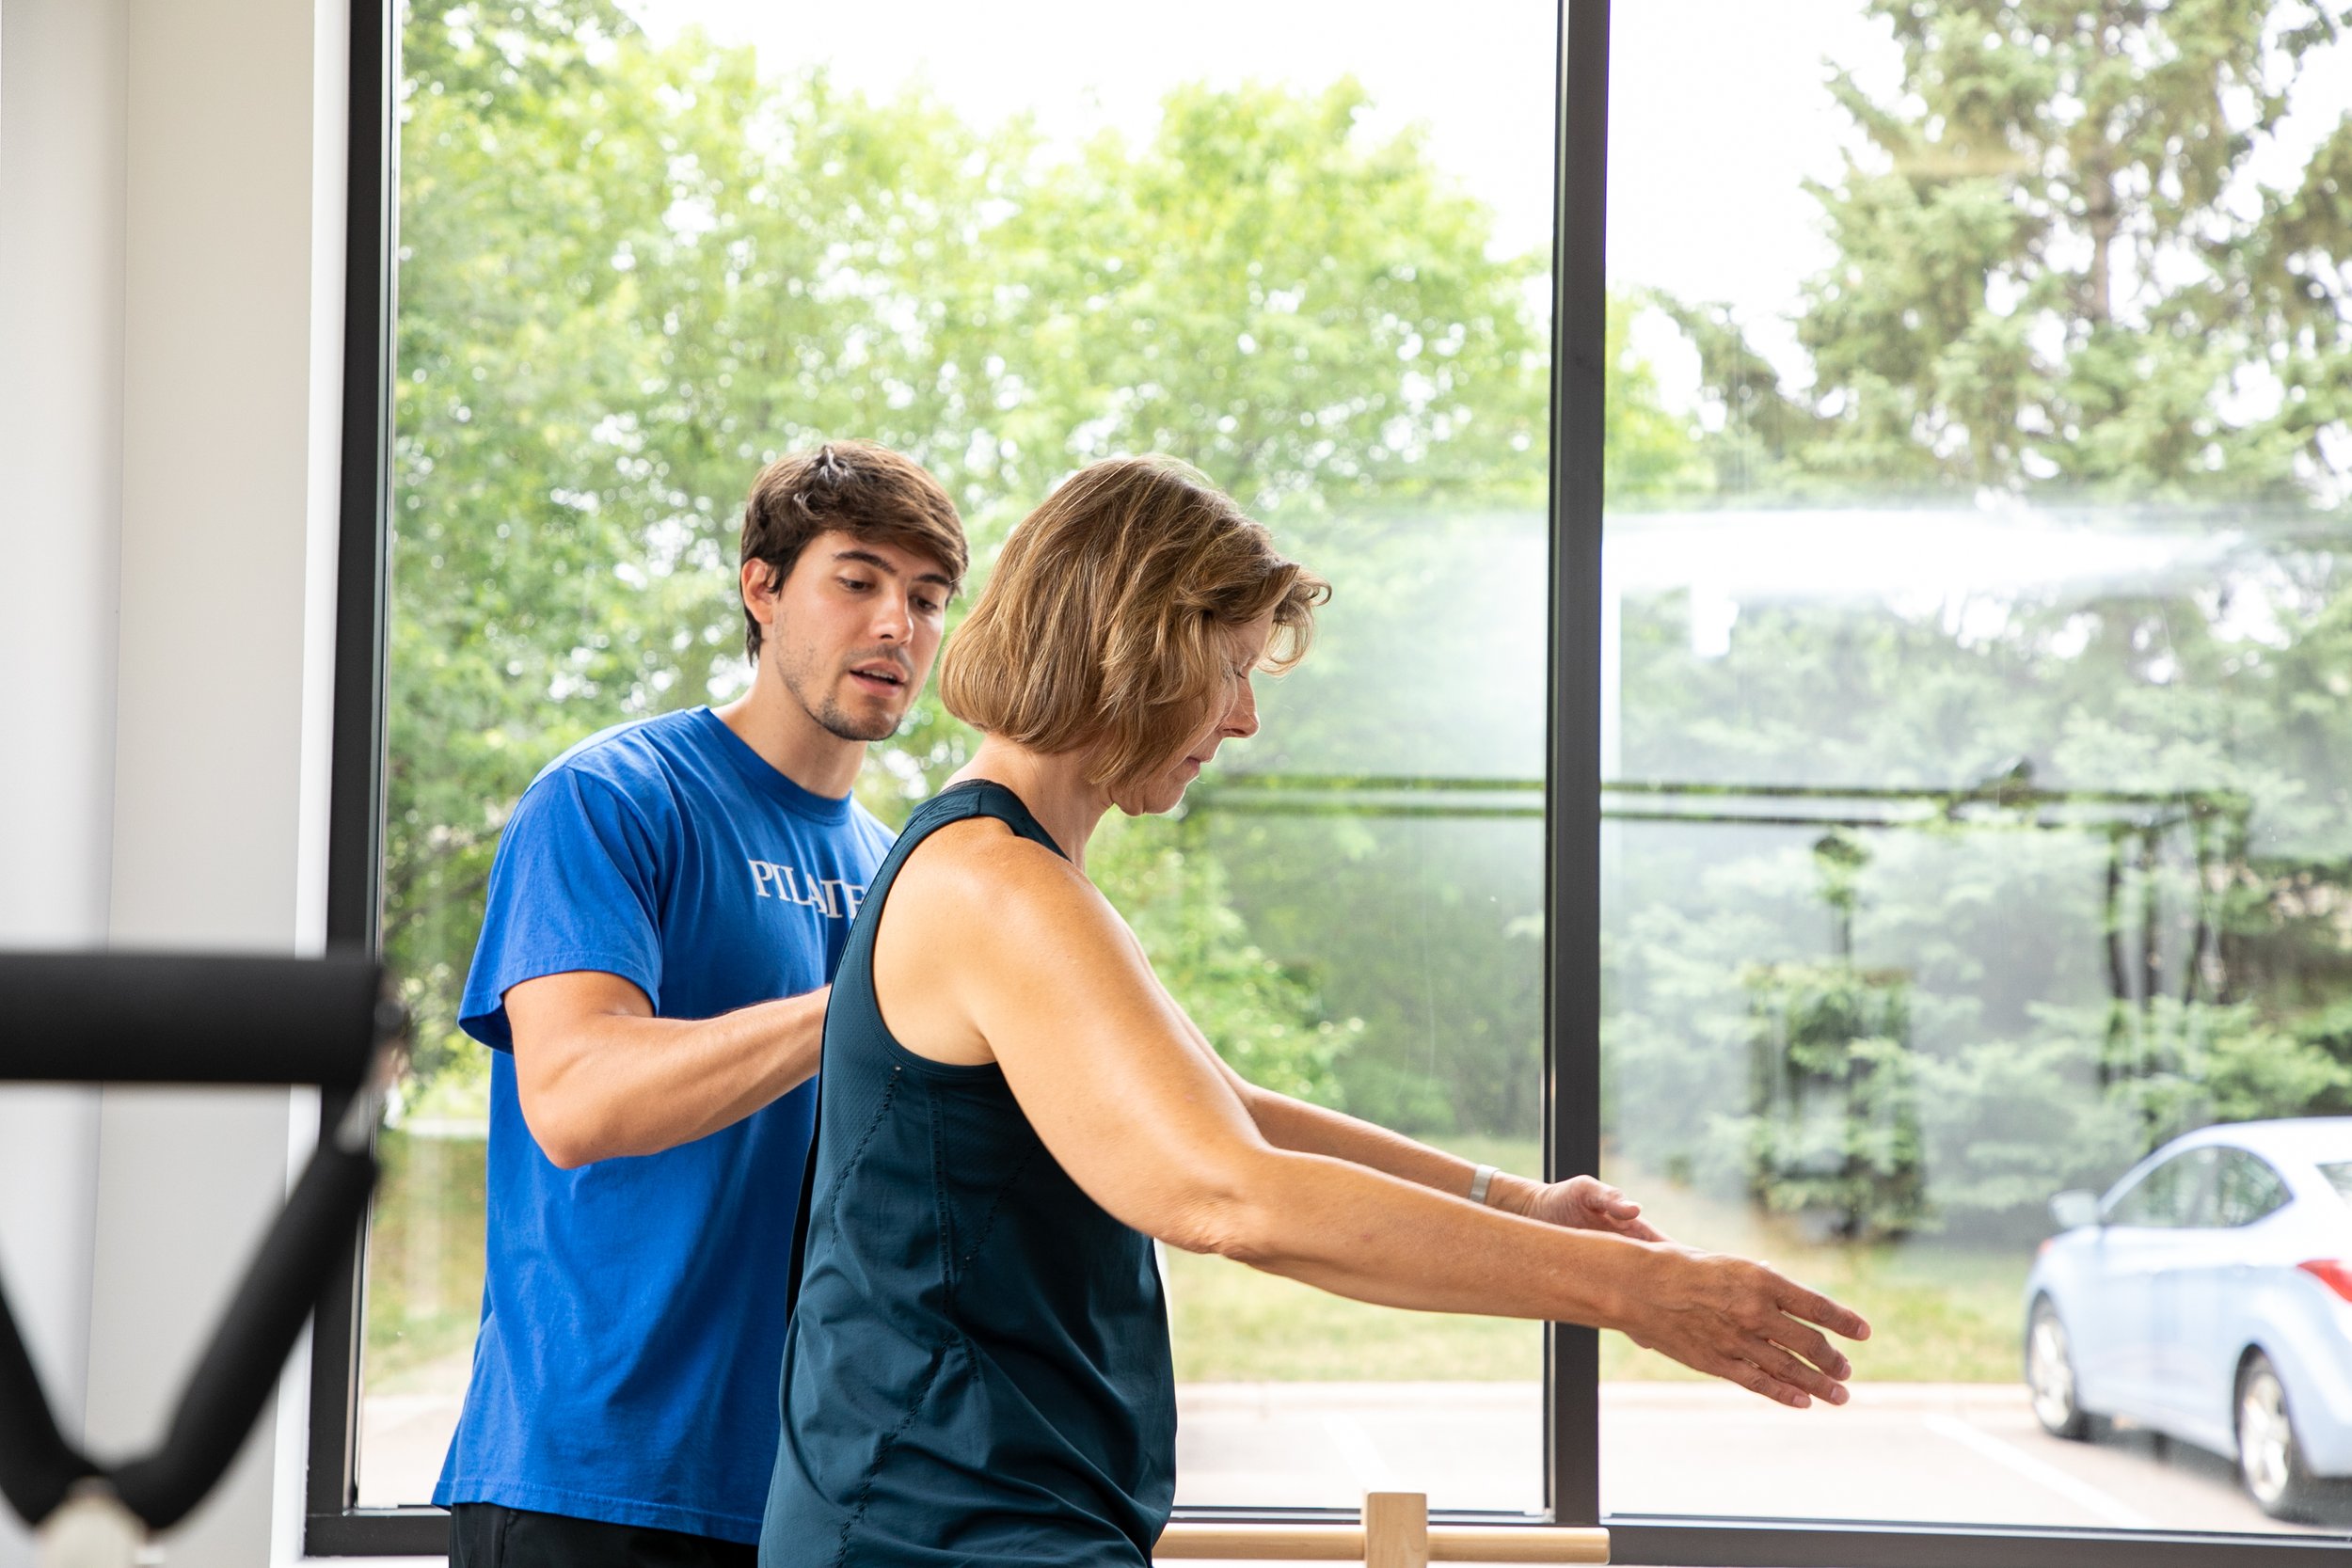   We’re Hiring!   Pilates MN is looking for employees that want a team approach to help clients develop their goals for healthy living.    Learn More   